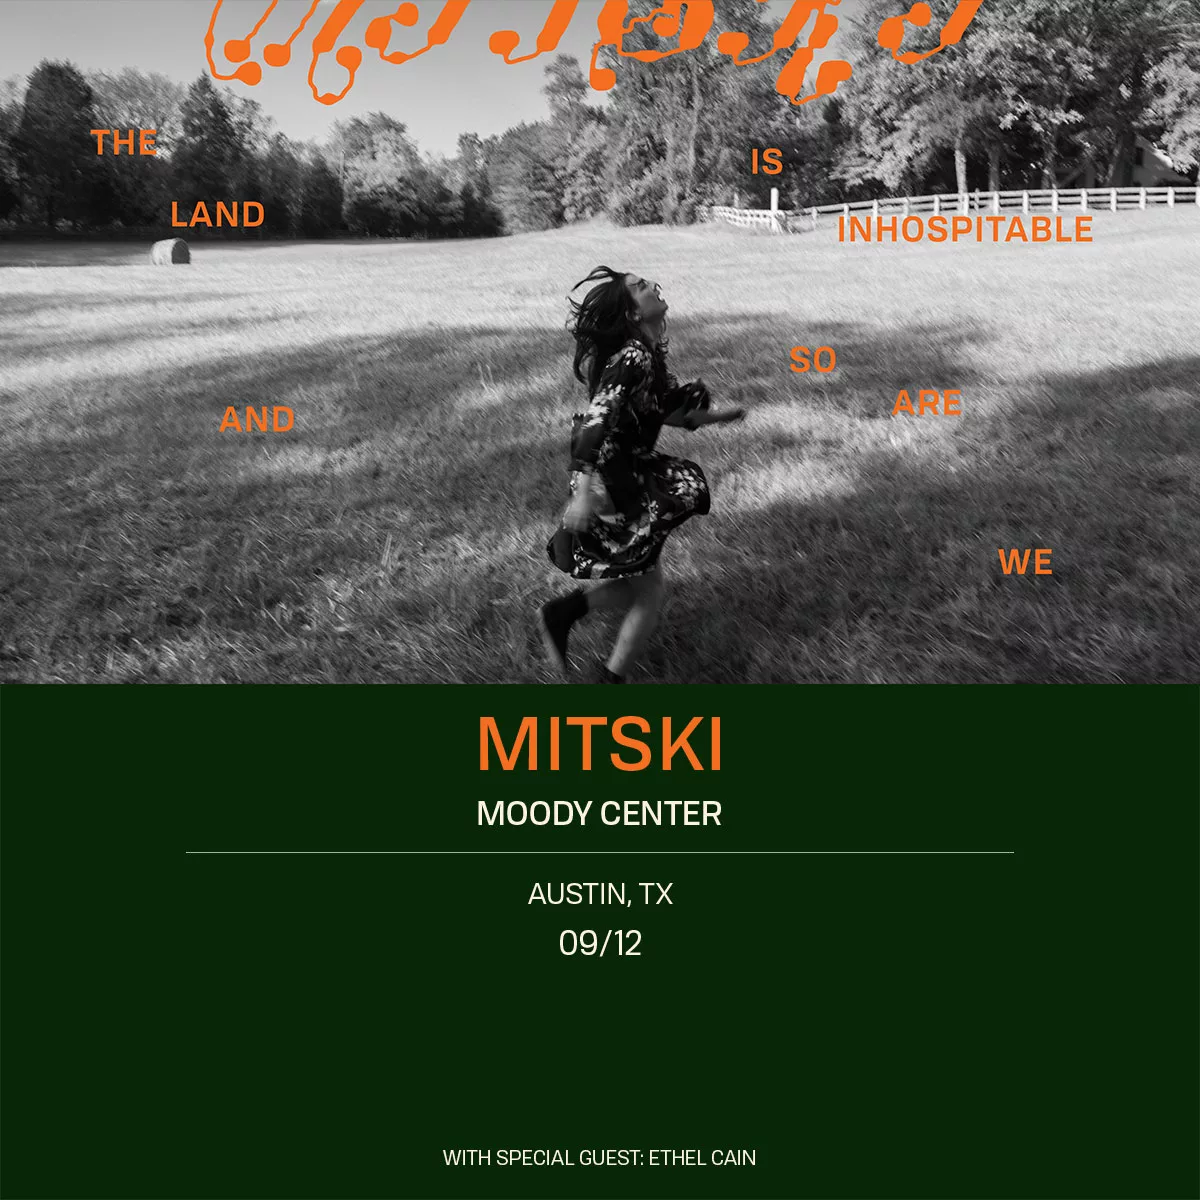 Mitski is coming to the Moody Center